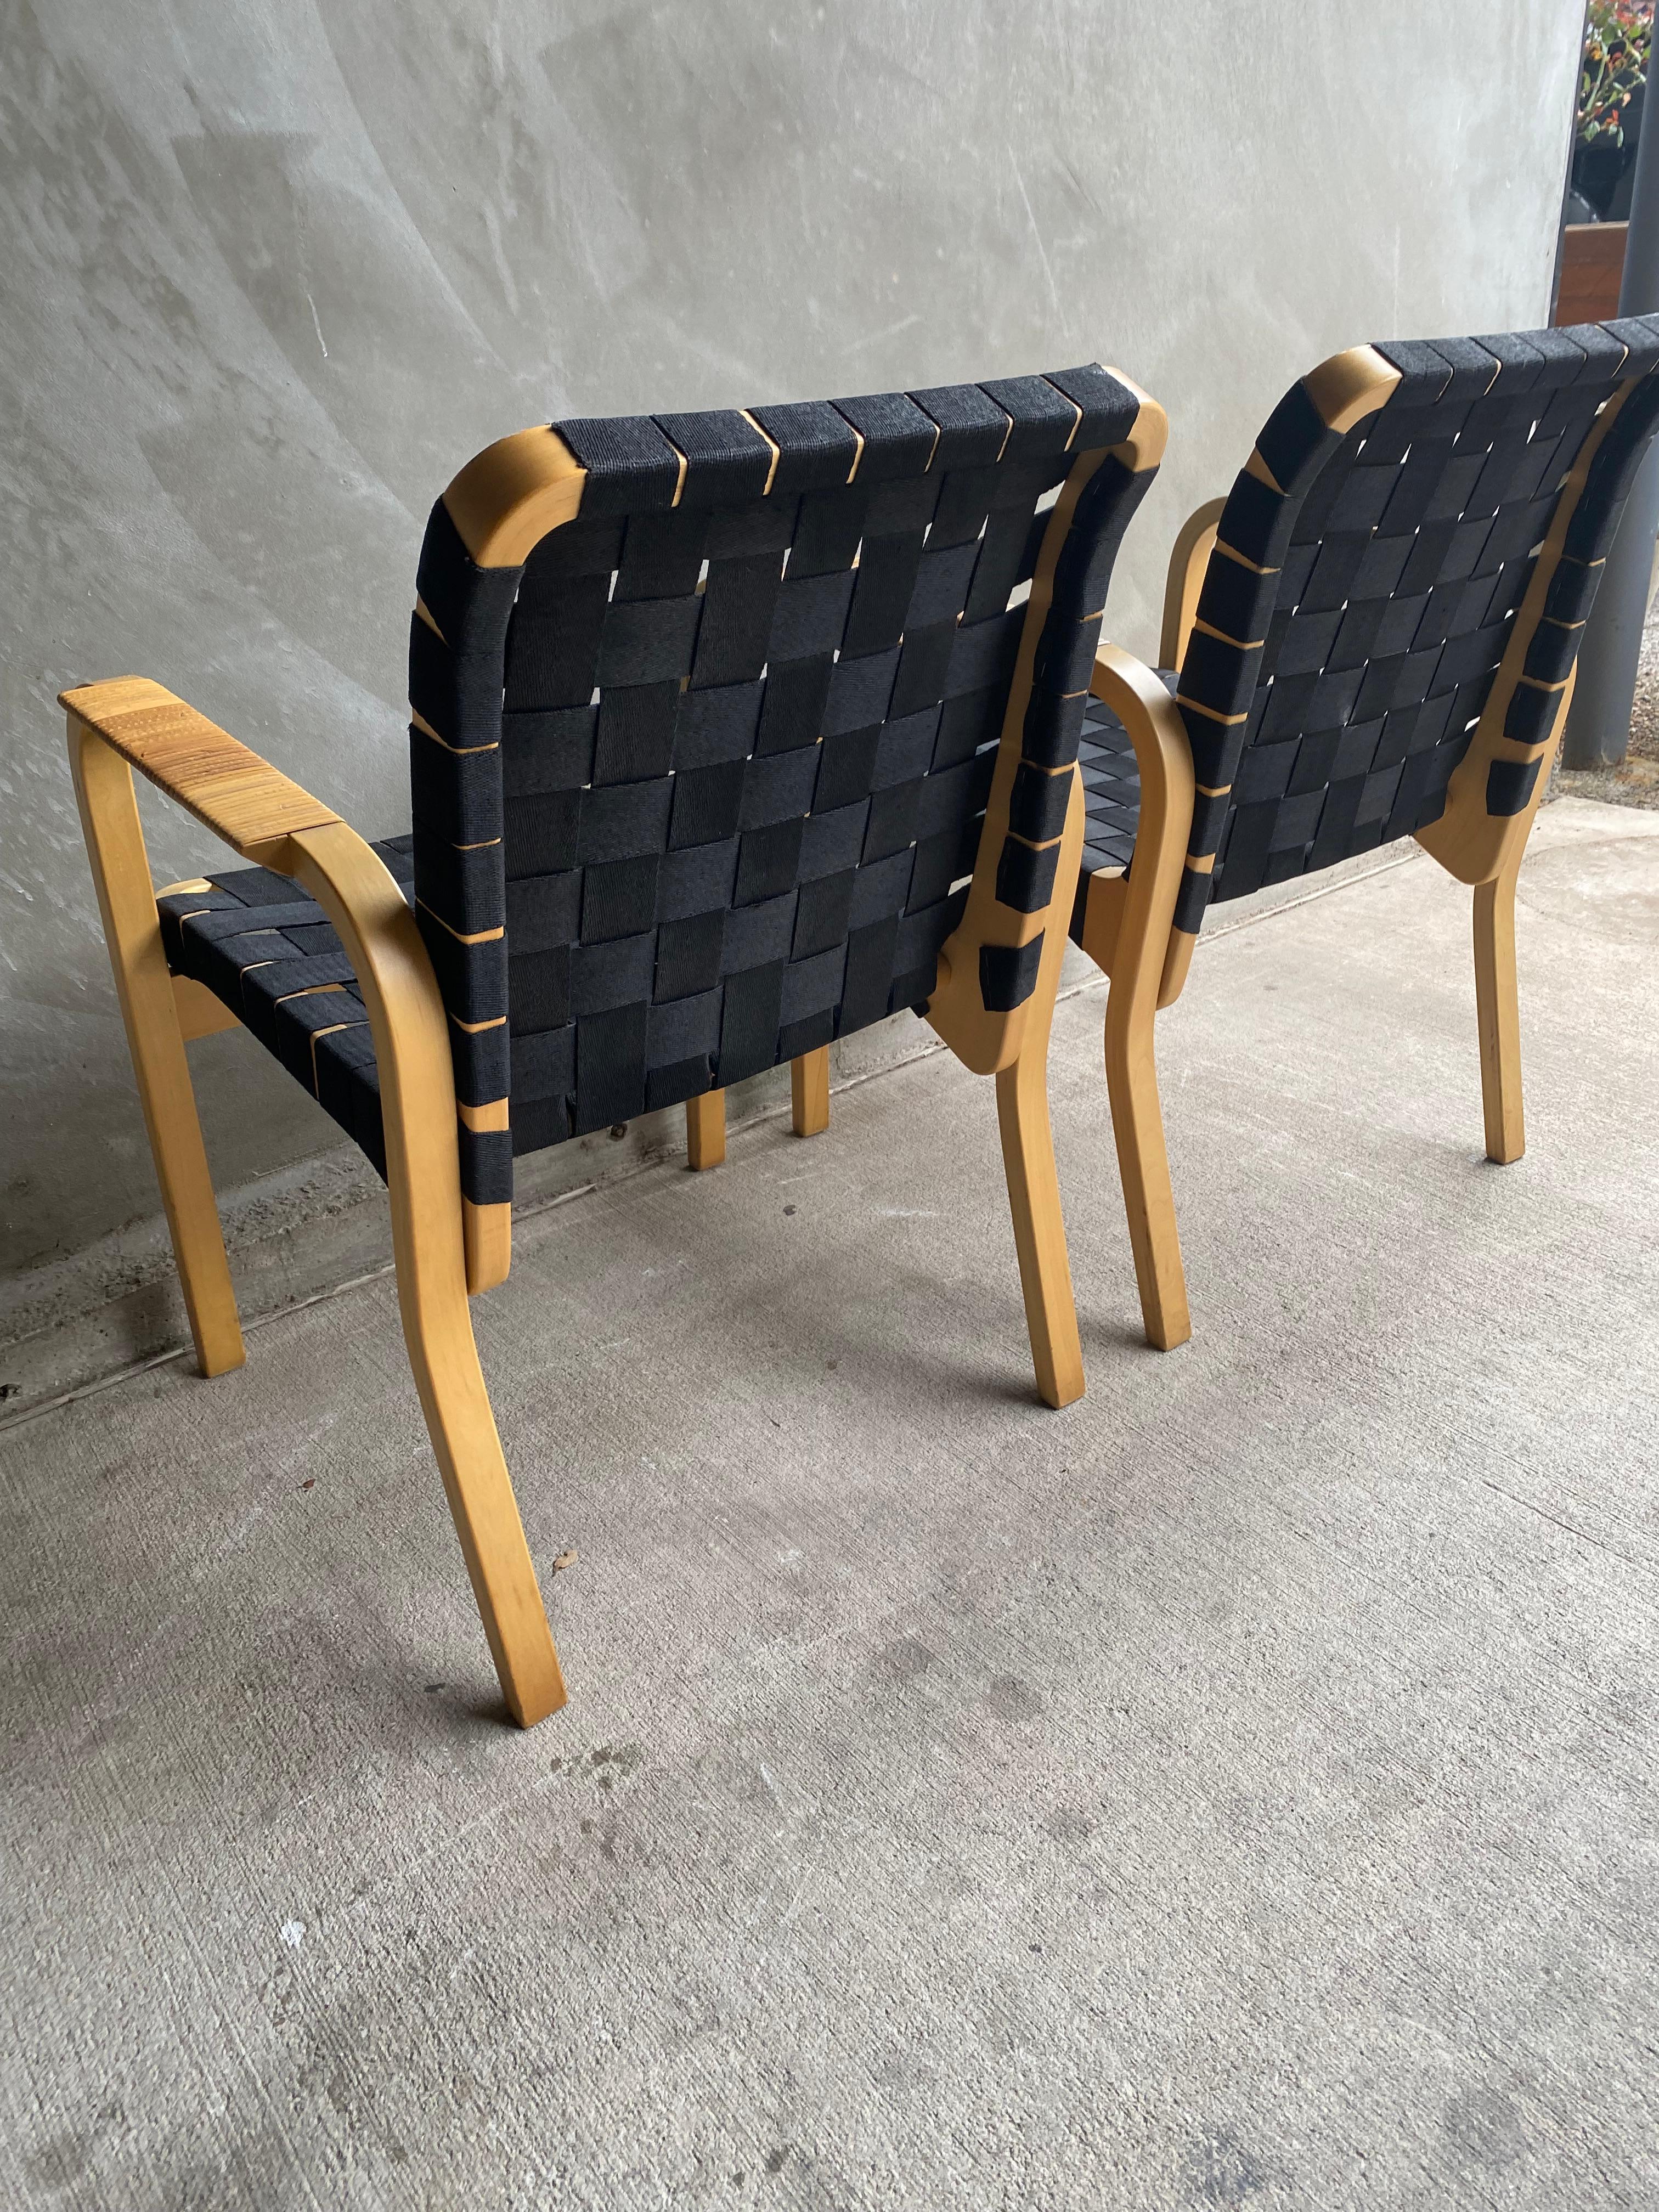 Set of 4 Alvar Aalto Chairs with Black Straps, Finland, 1960's For Sale 4